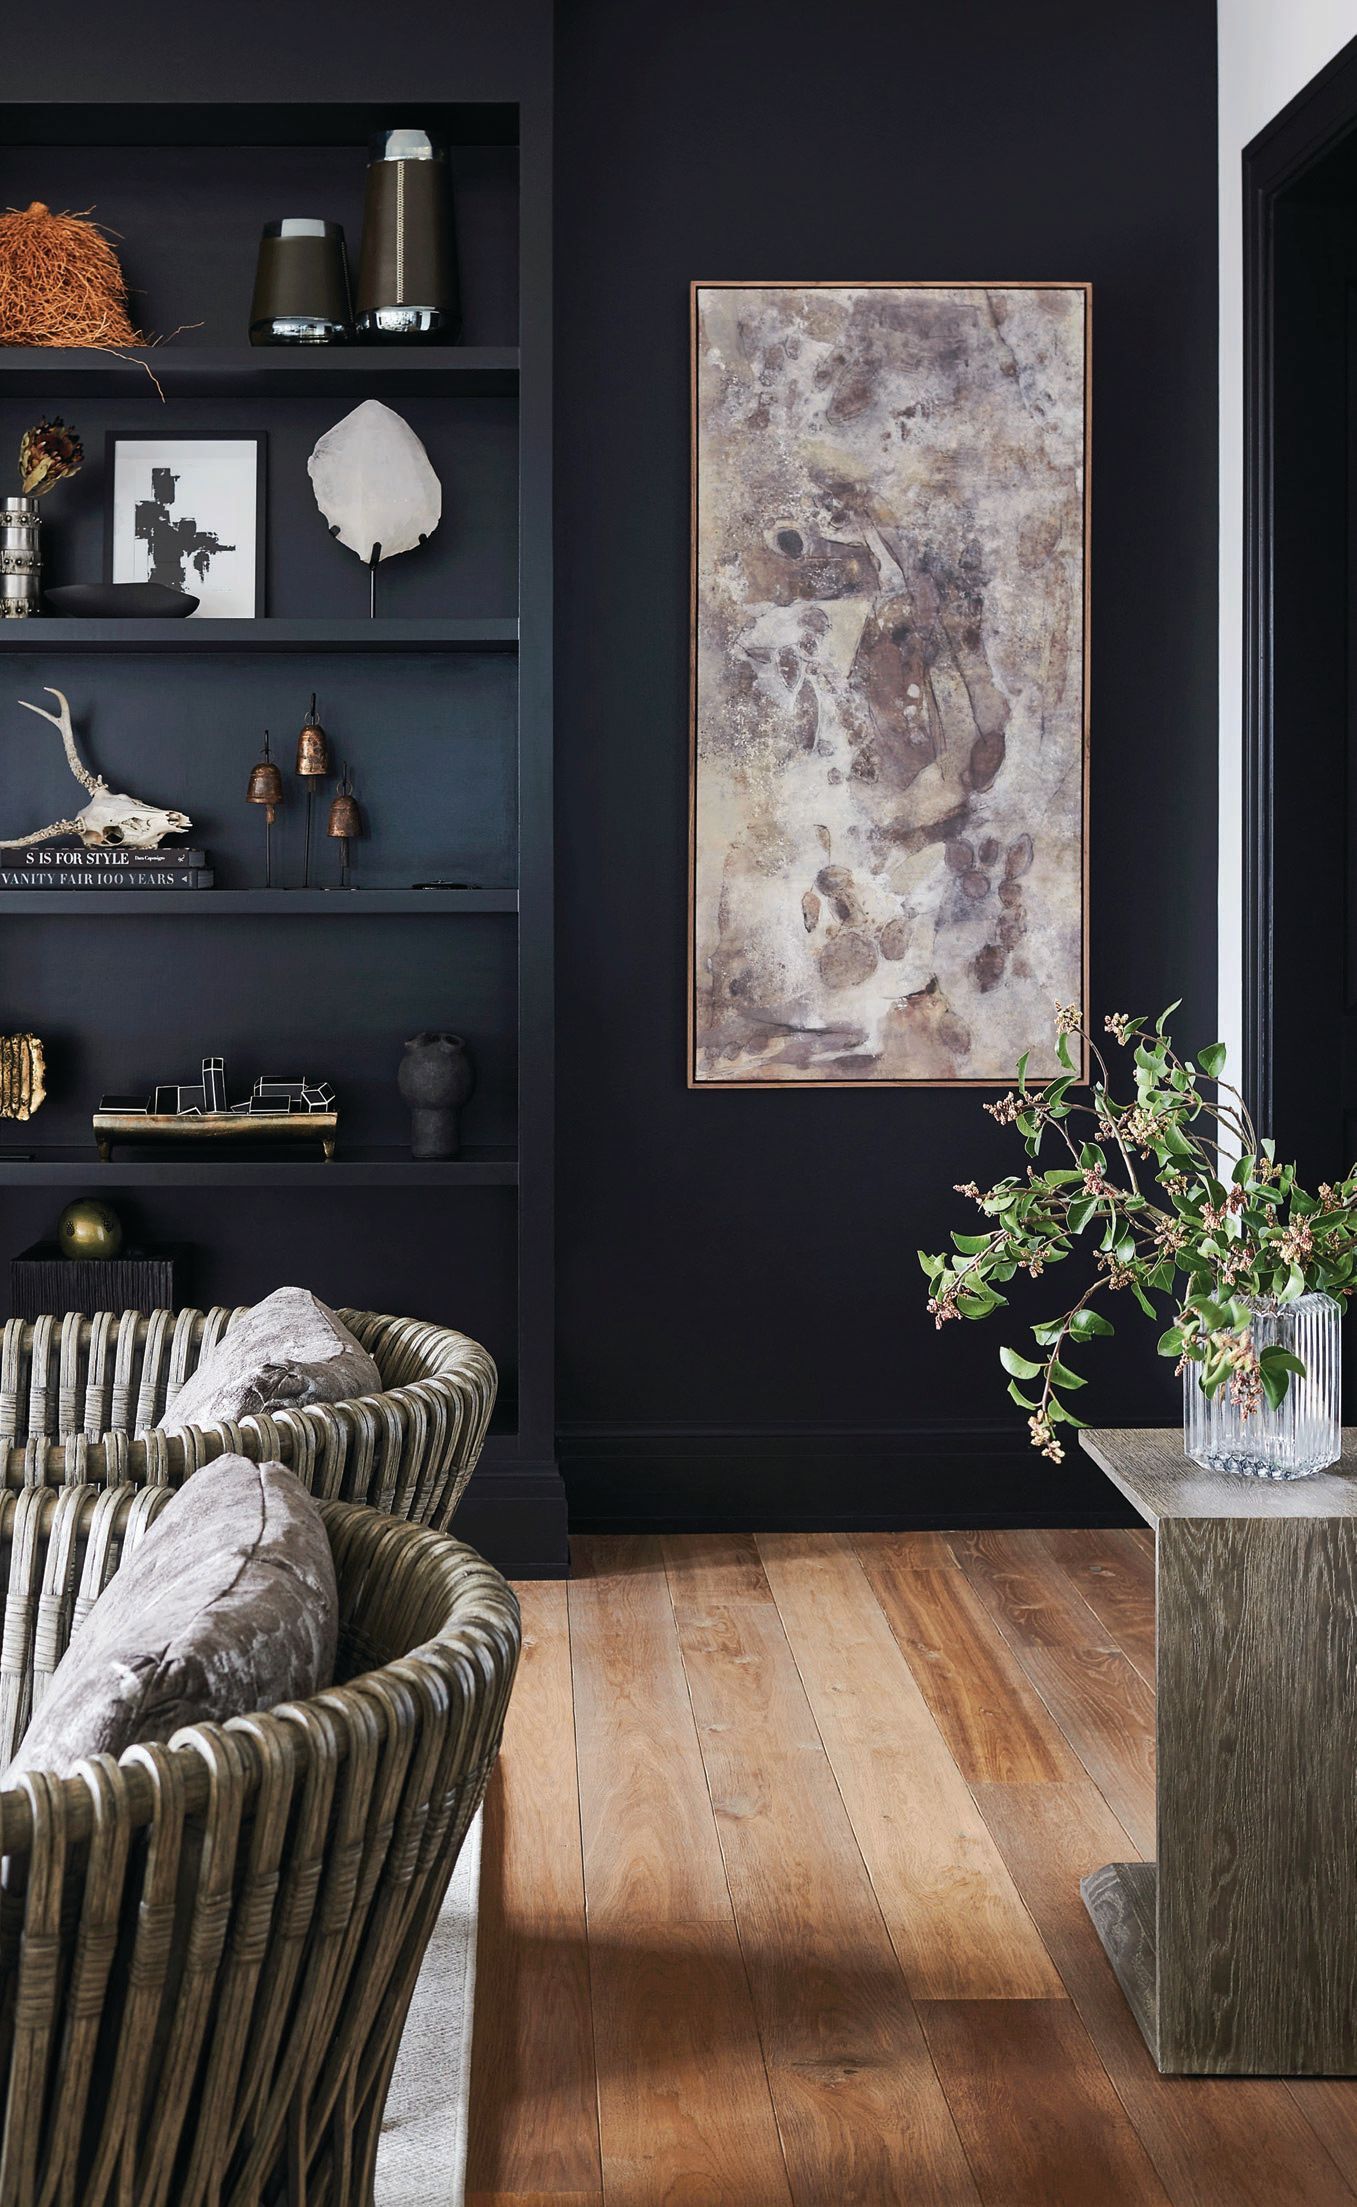 In the living room, Benjamin Moore’s Black Beauty sets a stylish scene with Arteriors Strata chairs, the artwork “Penumbra II” by Matera and shelves brimming with smartly curated accessories. Photographed by Anthony Tahlier